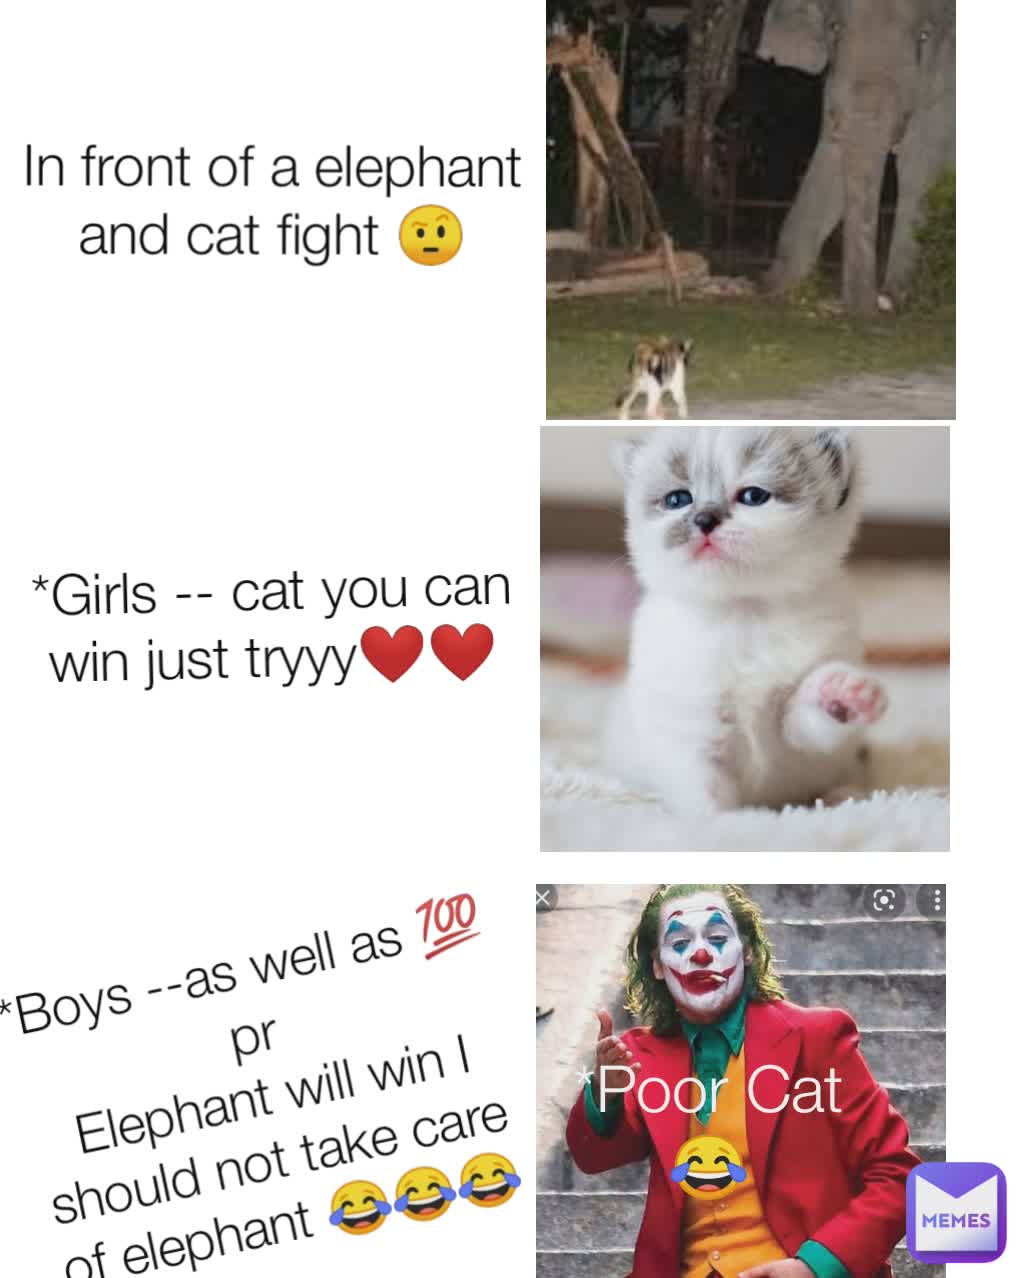 In front of a elephant and cat fight 🤨 *Boys --as well as 💯 pr
 Elephant will win I should not take care of elephant 😂😂😂 *Girls -- cat you can win just tryyy❤️❤️ *Poor Cat 😂